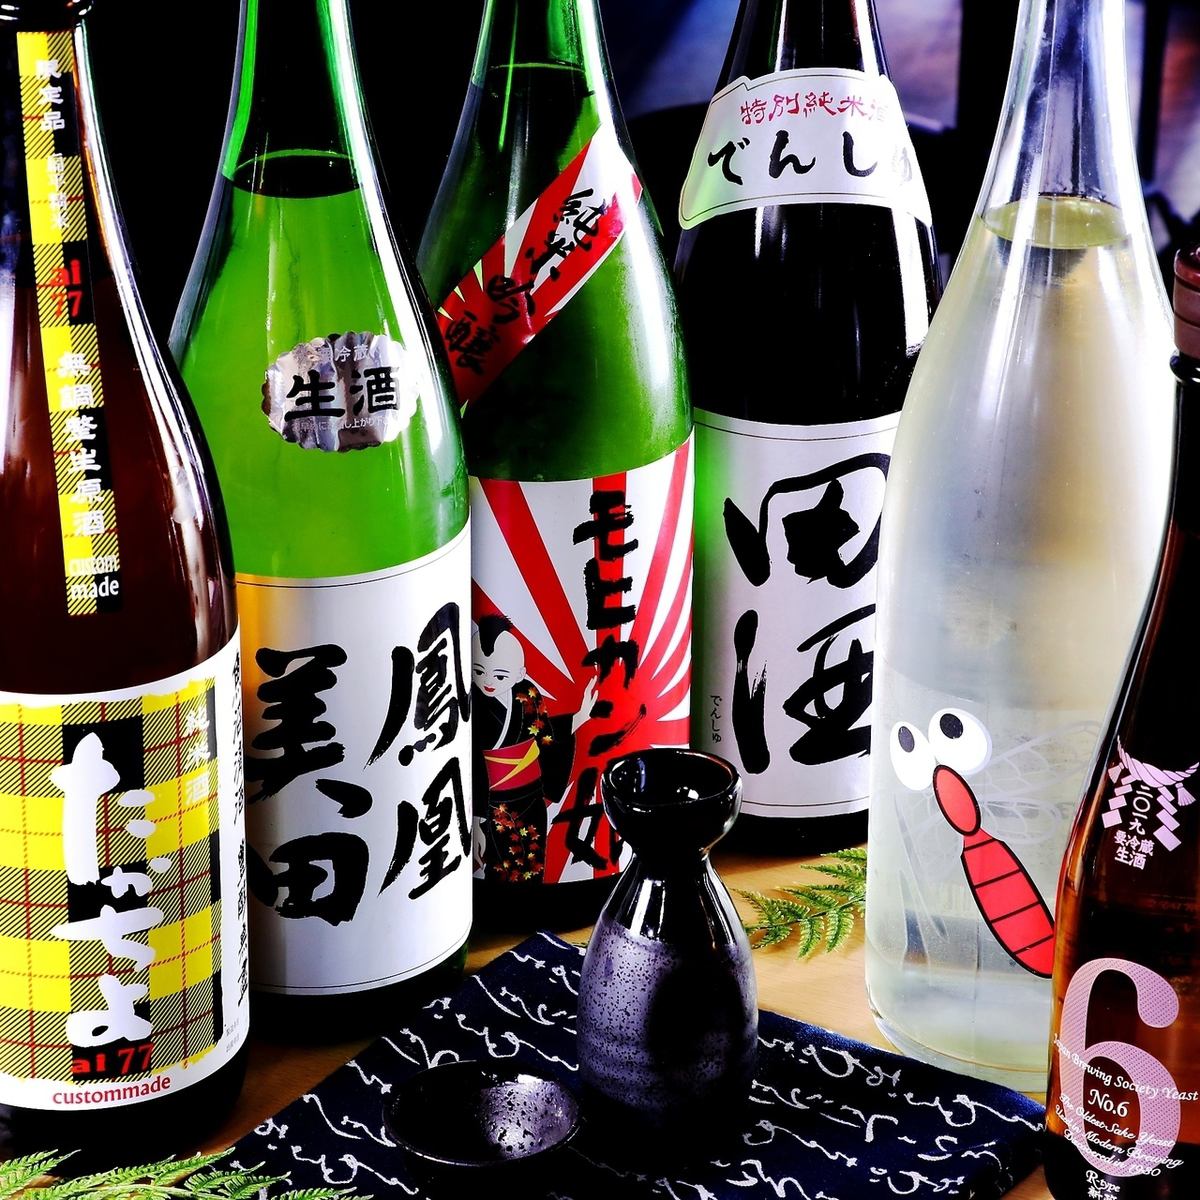 Popular brands such as Denshu and Arima No6 are also available! Please enjoy Japanese sake as well!